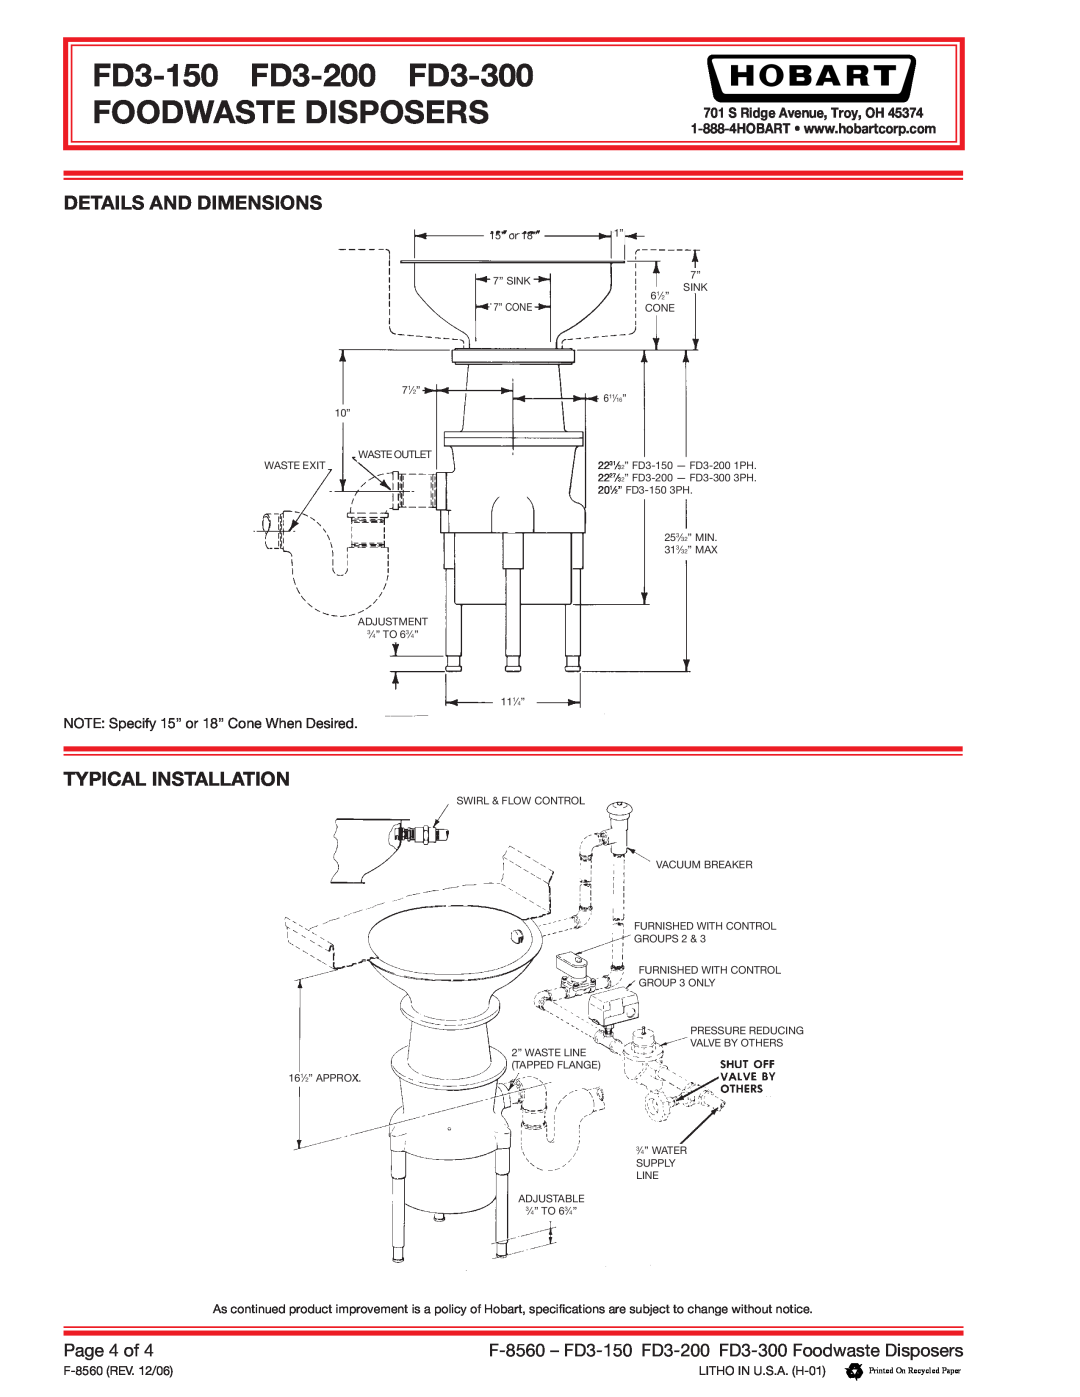 Hobart Details And Dimensions, Typical Installation, FD3-150 FD3-200 FD3-300 FOODWASTE DISPOSERS, F-8560REV. 12/06 